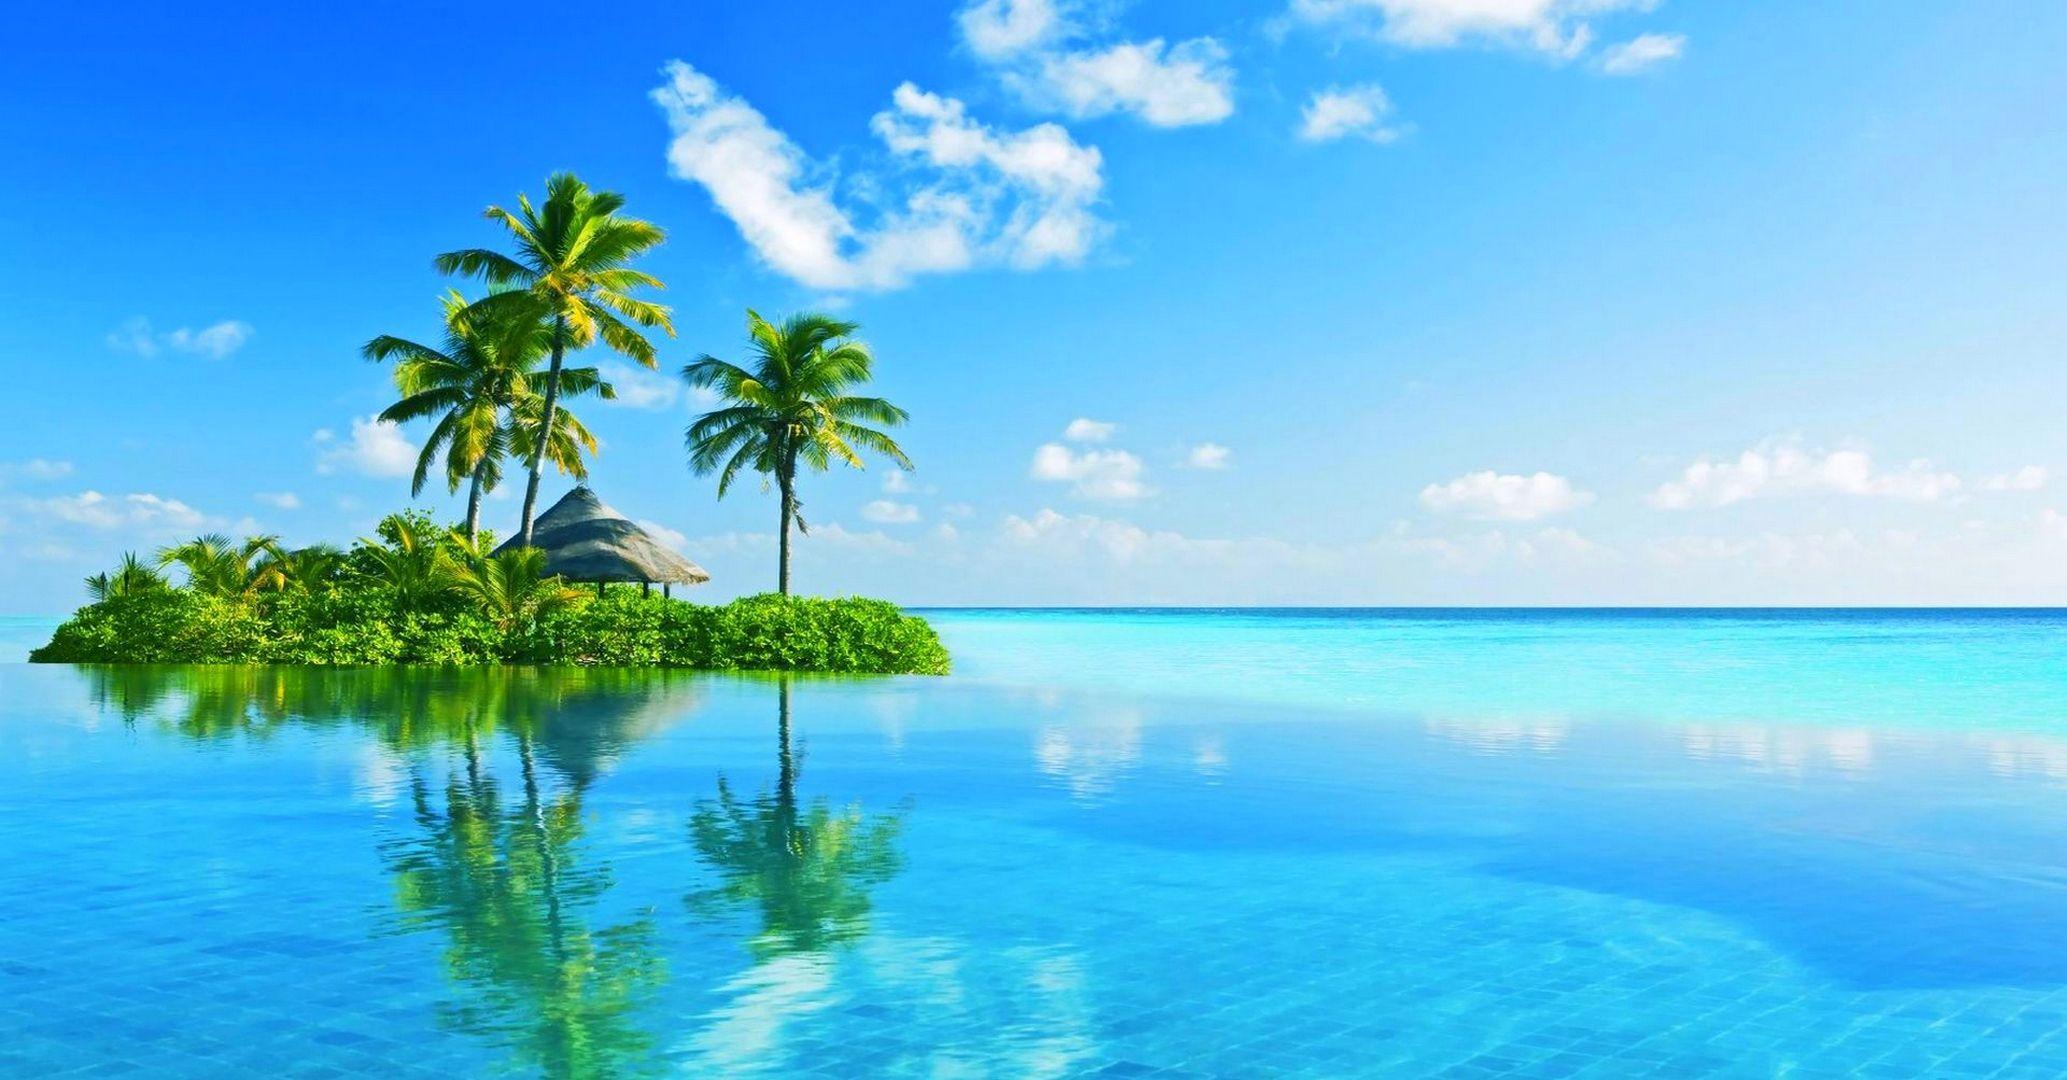 Tropical Island Paradise Wallpapers - Top Free Tropical Island Paradise Backgrounds